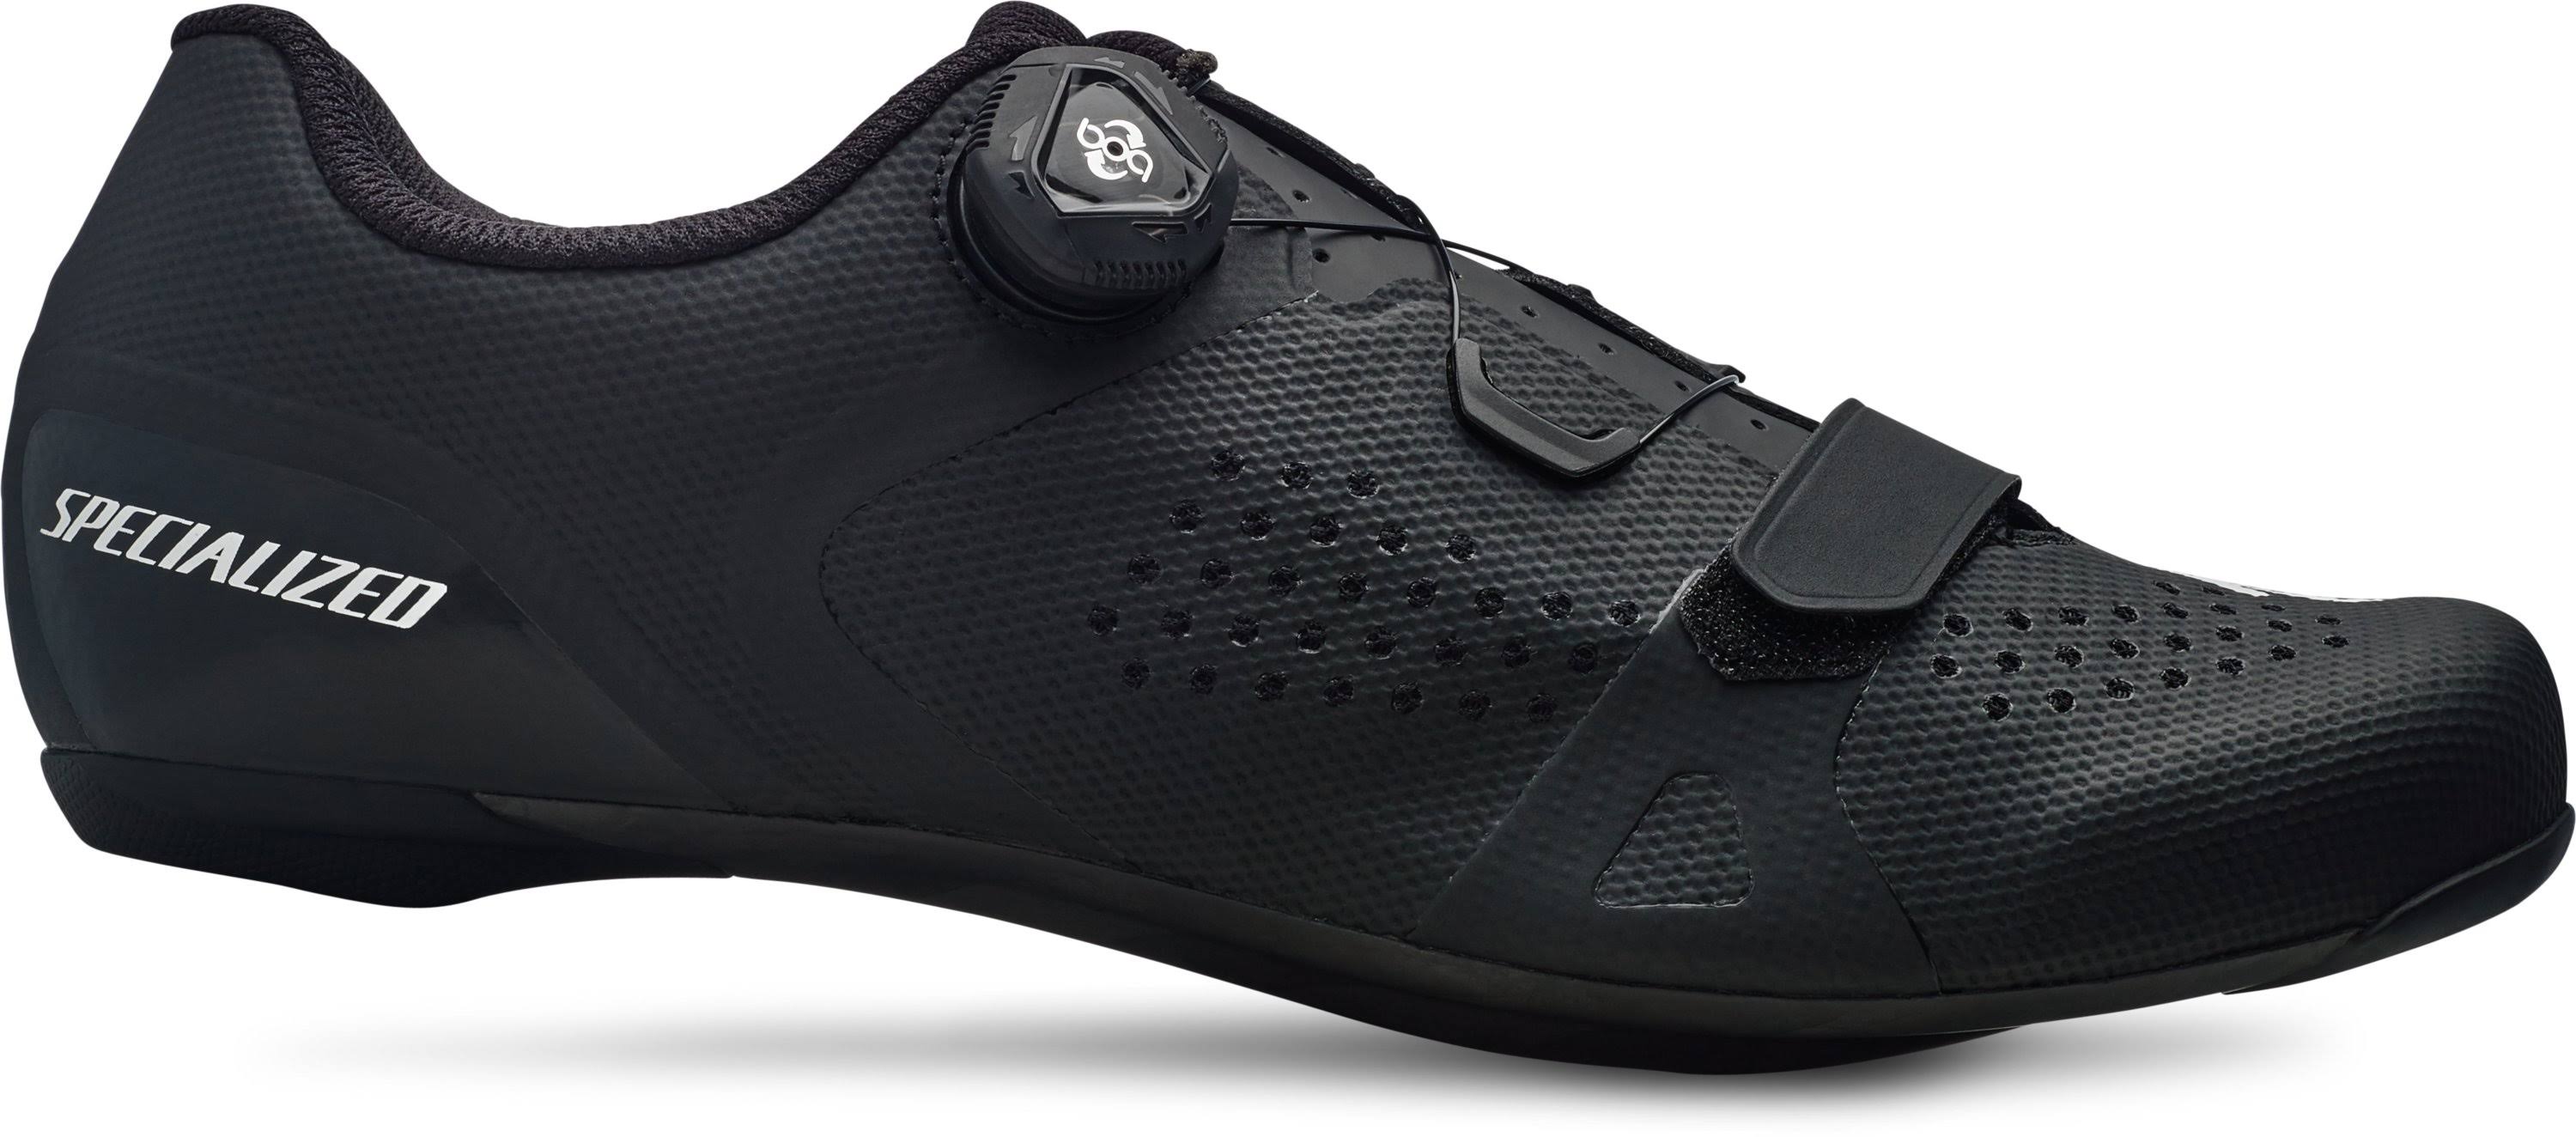 Specialized Torch 3.0 Road Shoe Black / 46.5